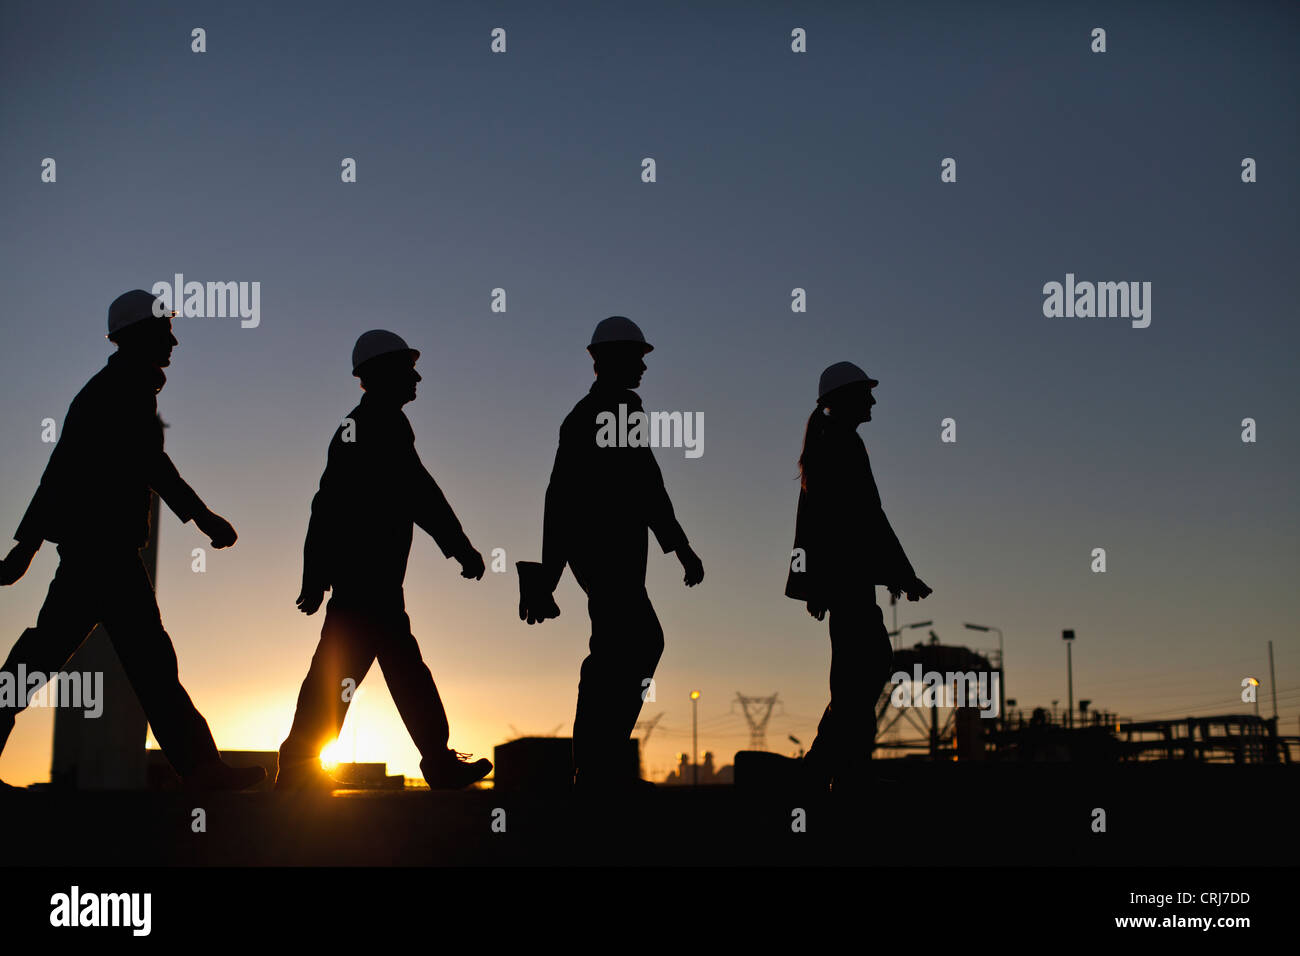 Silhouette of workers at oil refinery Stock Photo